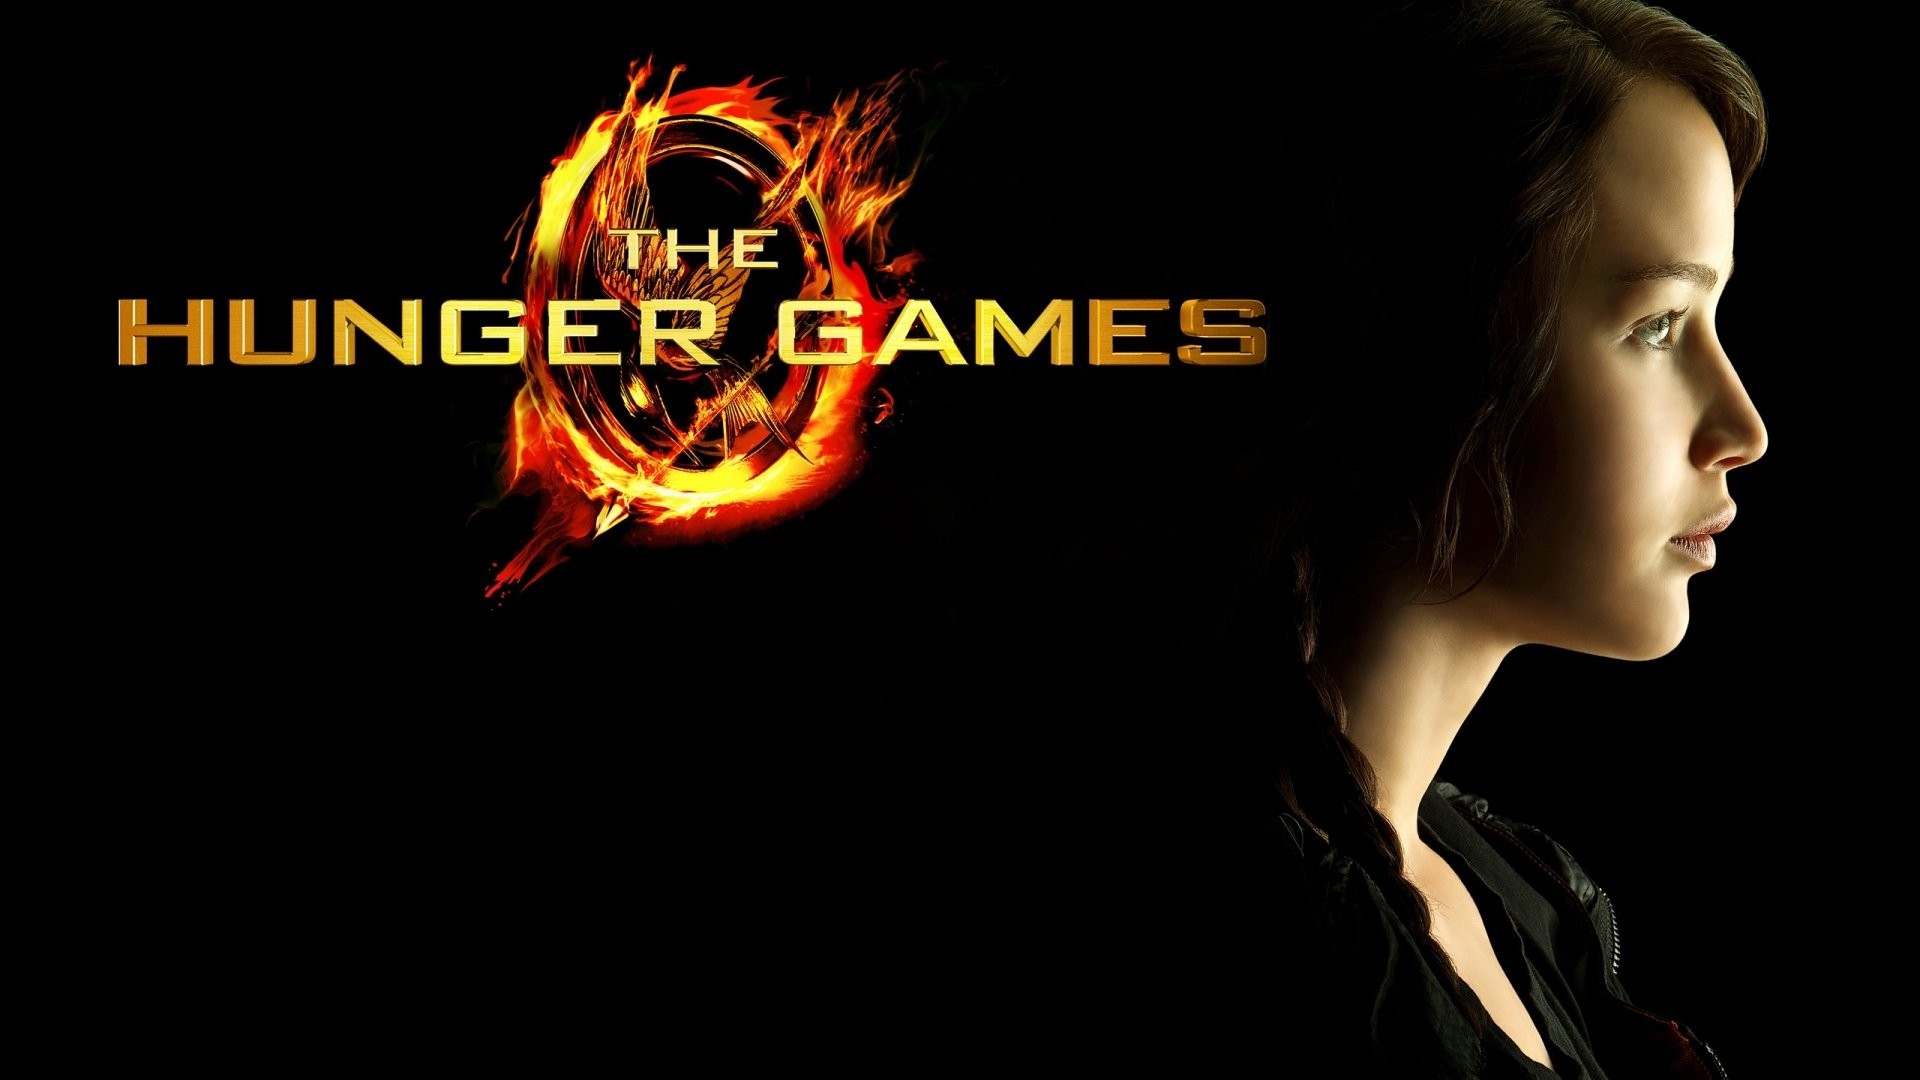 60 The Hunger Games HD Wallpapers and Backgrounds